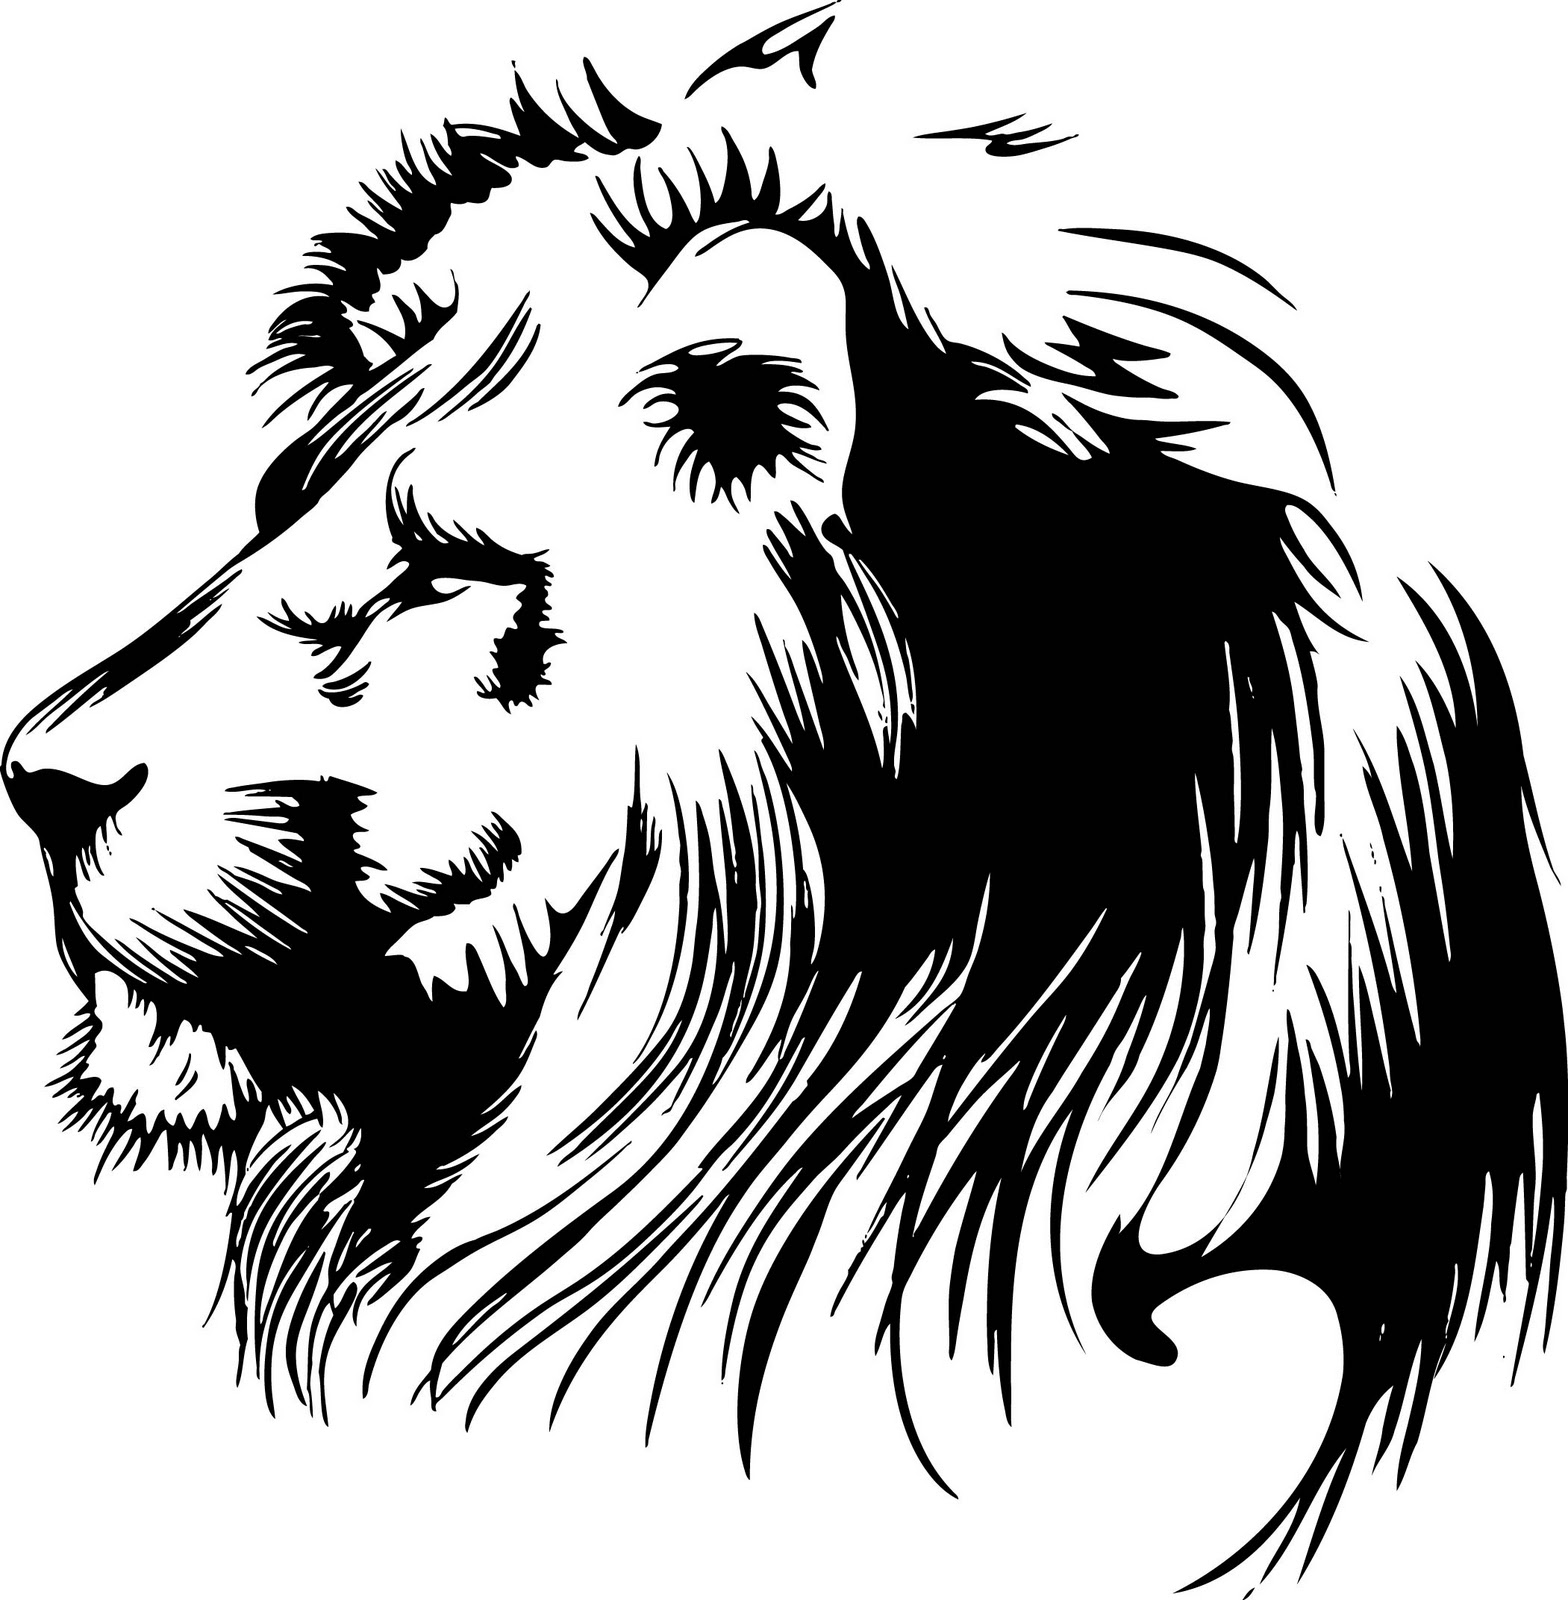 Lion Vector Art Image Head Clip Art Black and White, Lion Vector Free Download and Lion Line Drawing Vector / Newdesignfile.com